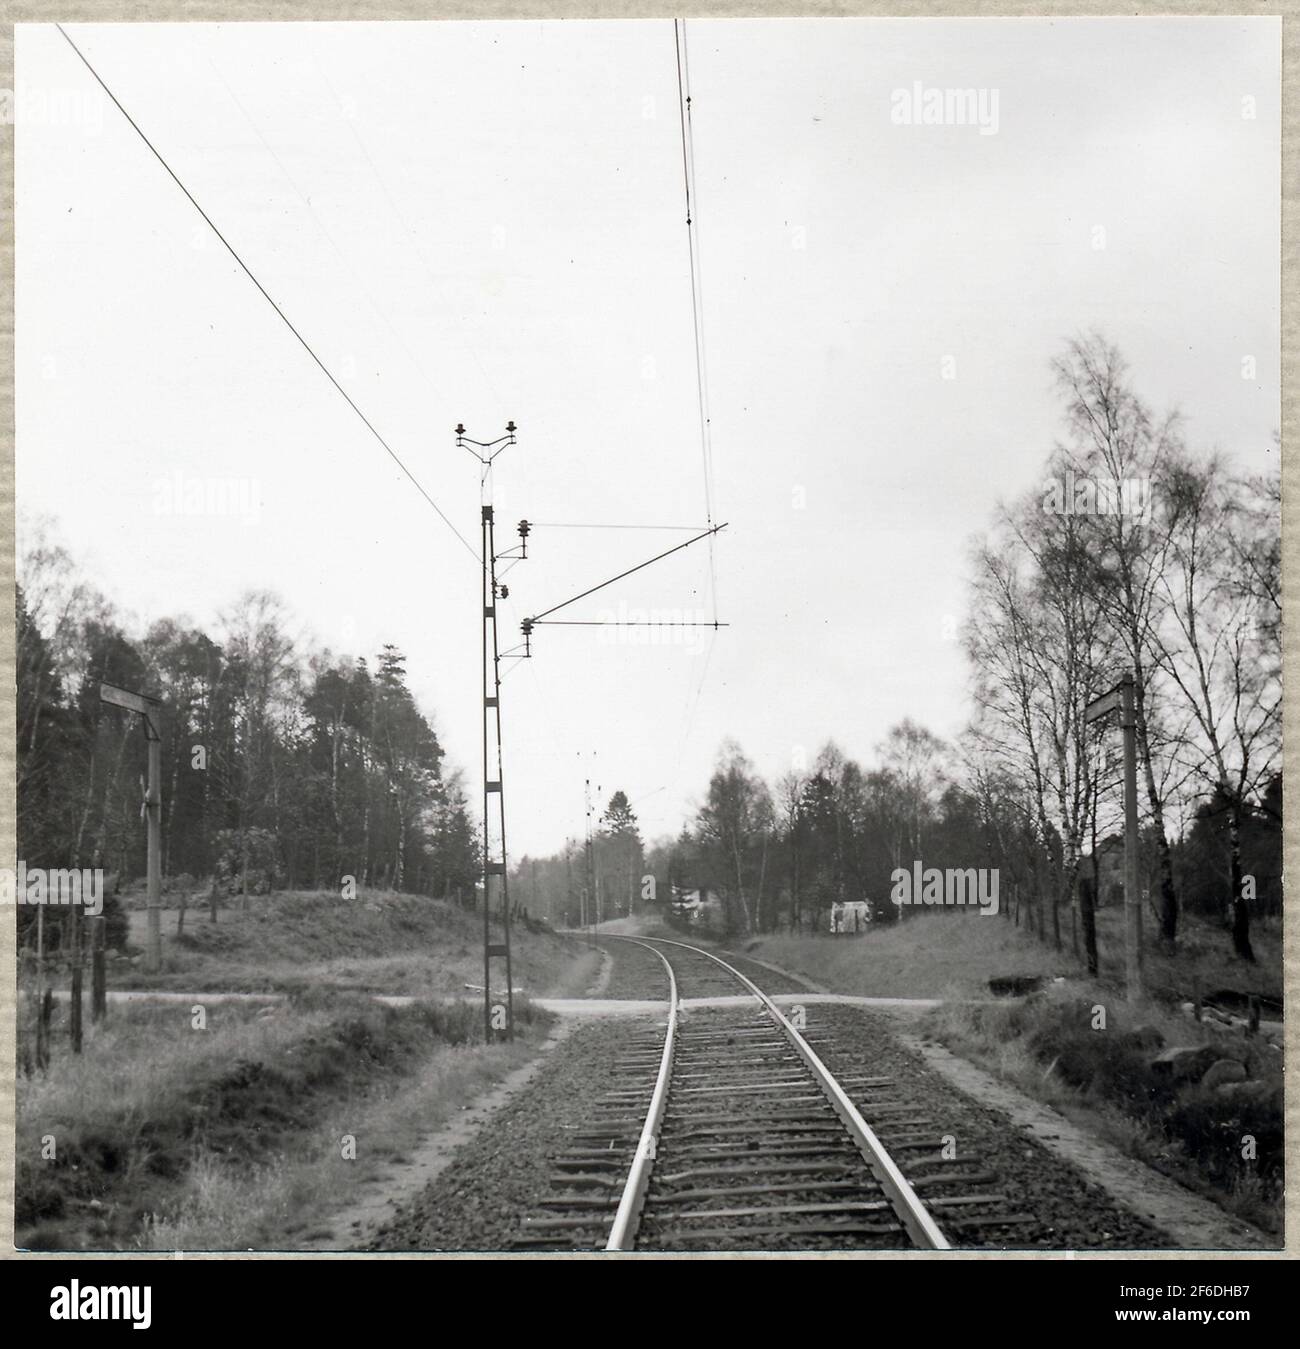 Railway transition during cross forest, on the route between Finja and Tyringe. Stock Photo